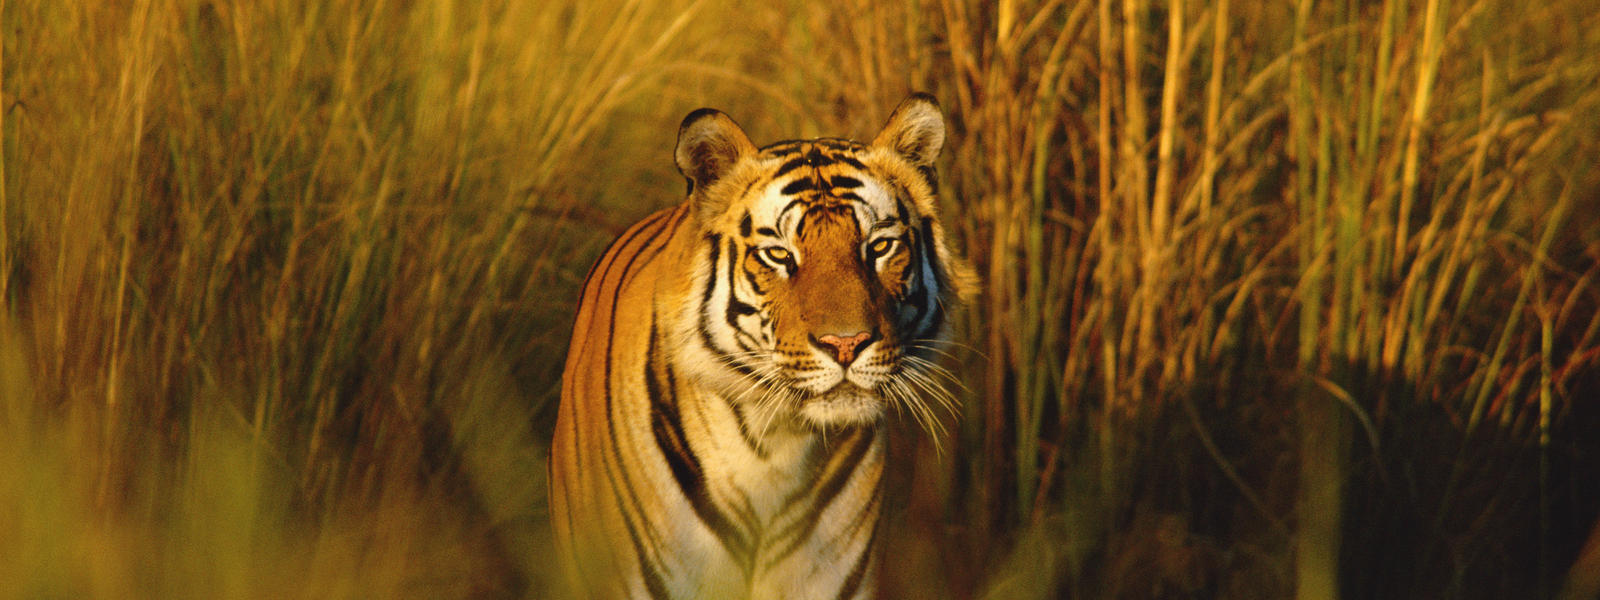 No evidence of Tiger in Mahisagar : Forest Department